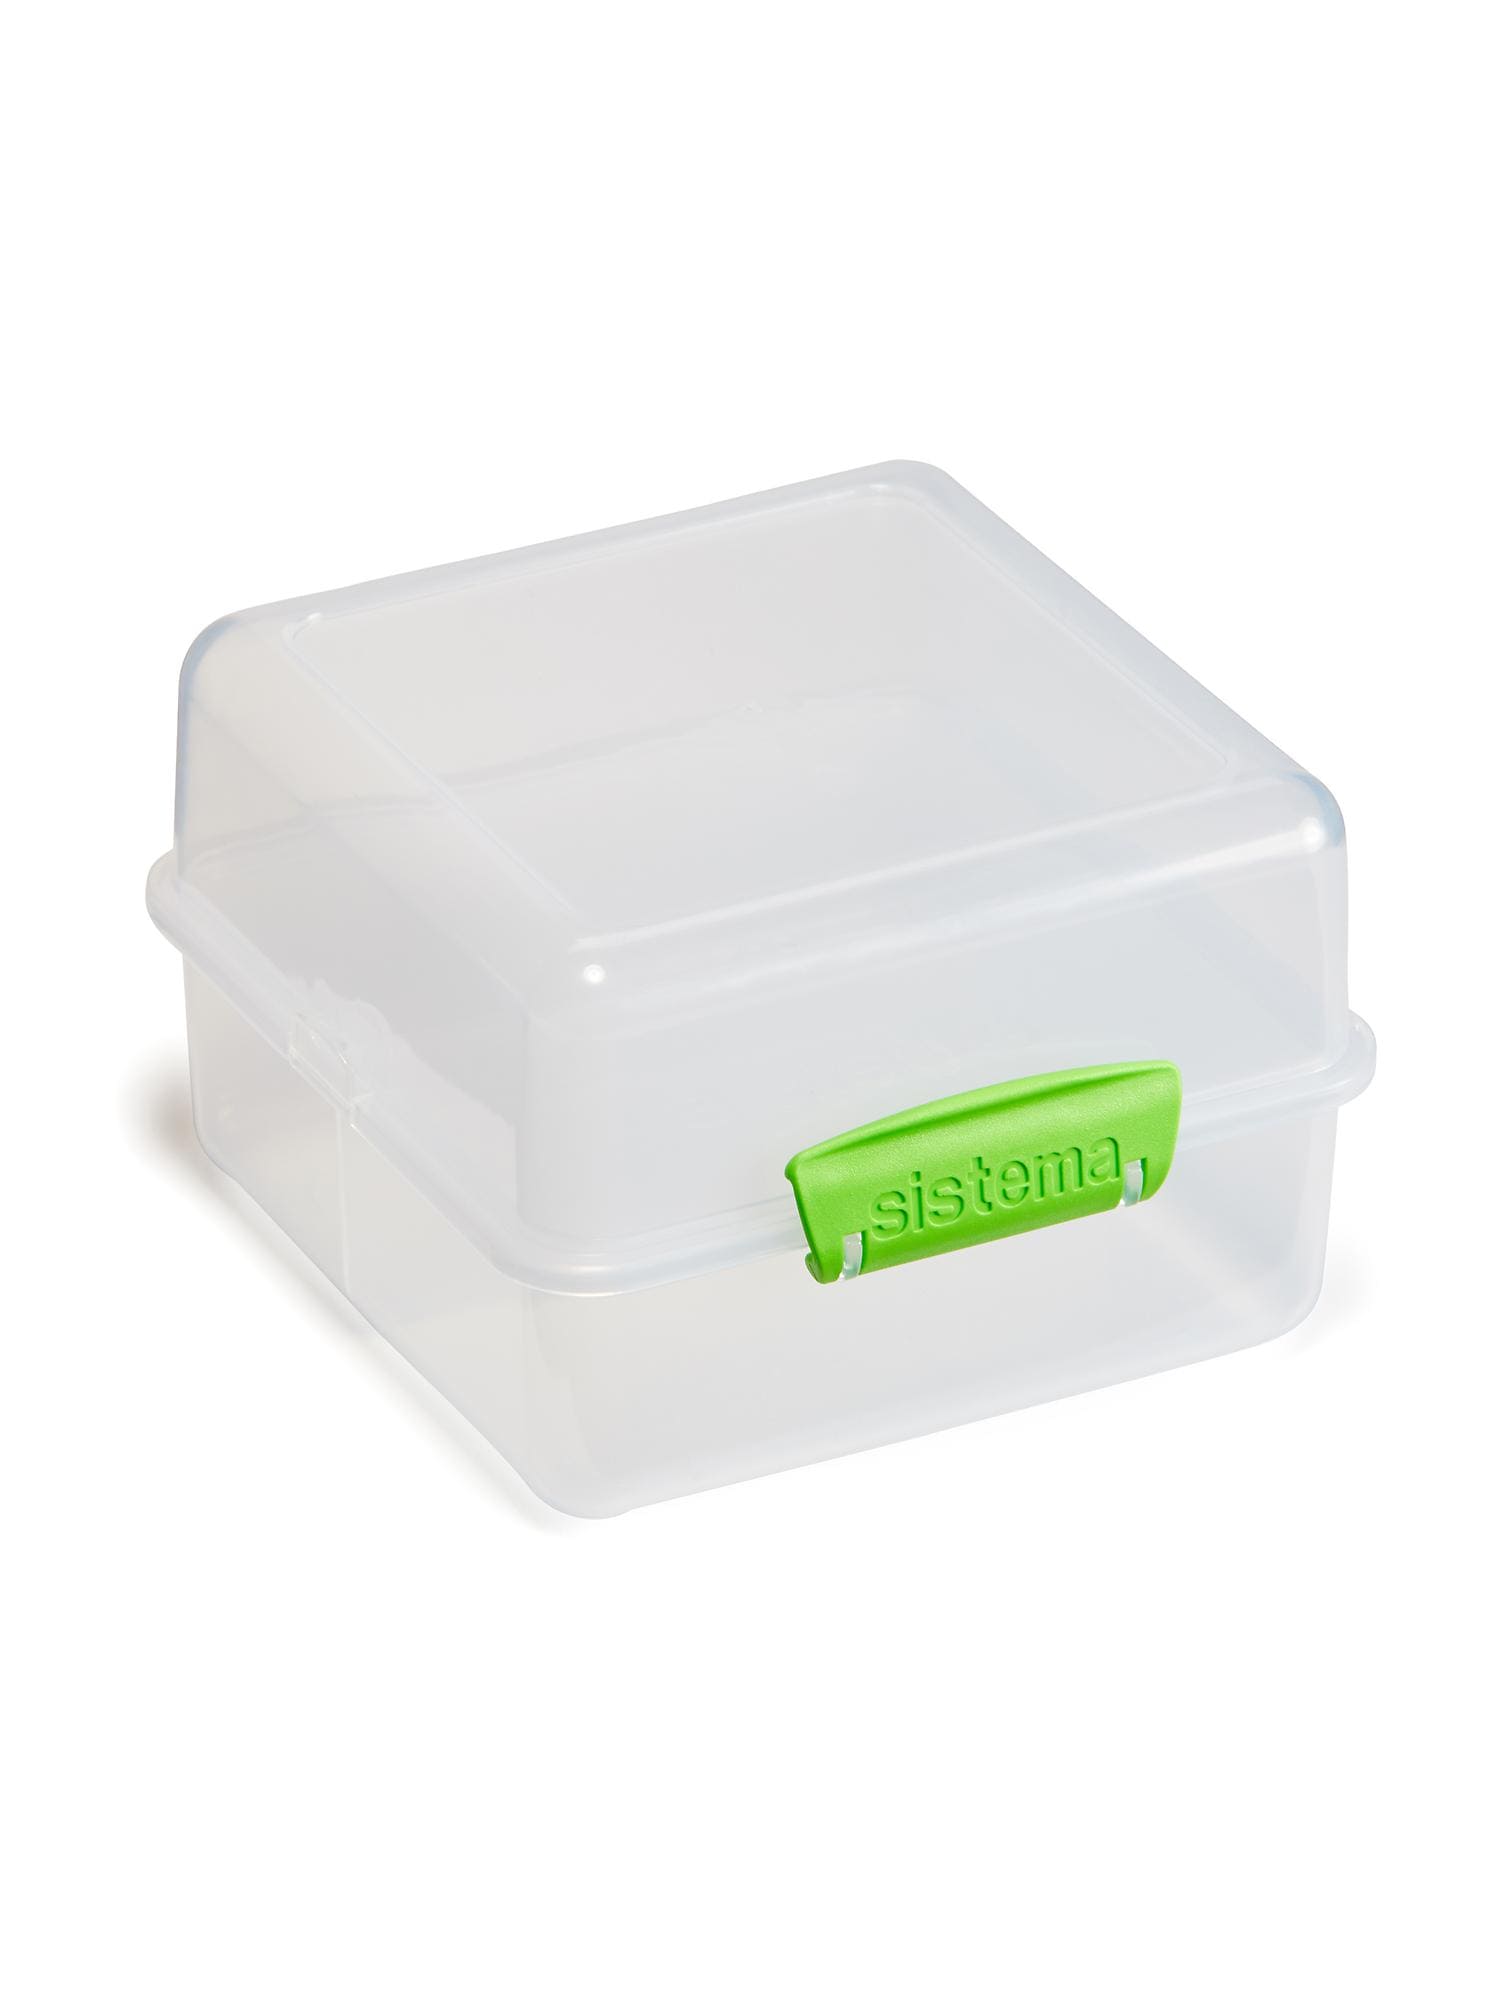 Sistema To Go 47.3 oz Lunch Cube Container